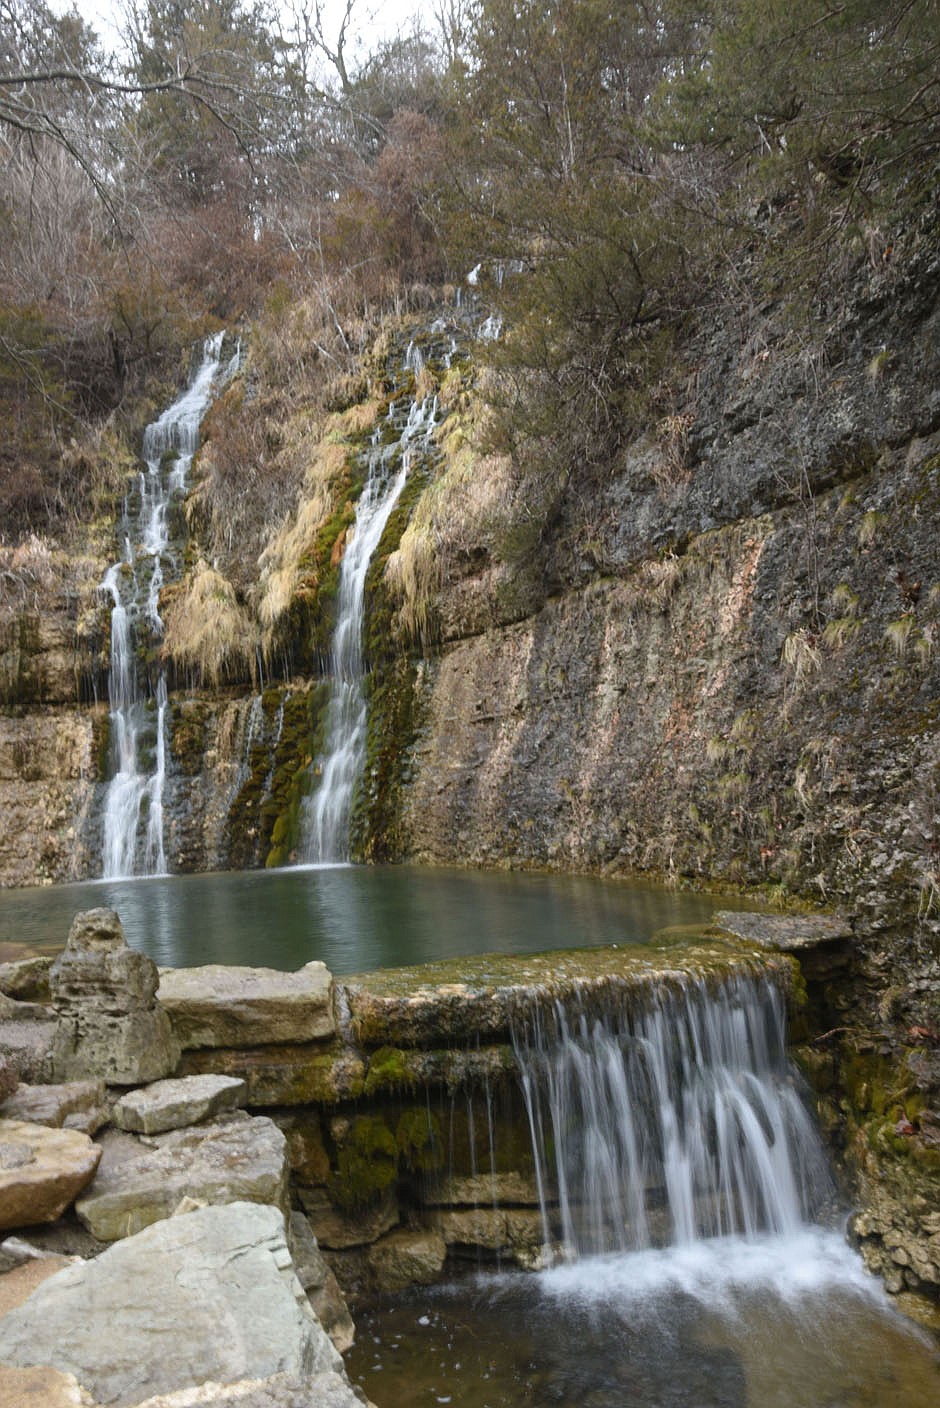 Waterfalls are abundant from one end of the park to the other. (NWA Democrat-Gazette/Flip Putthoff)